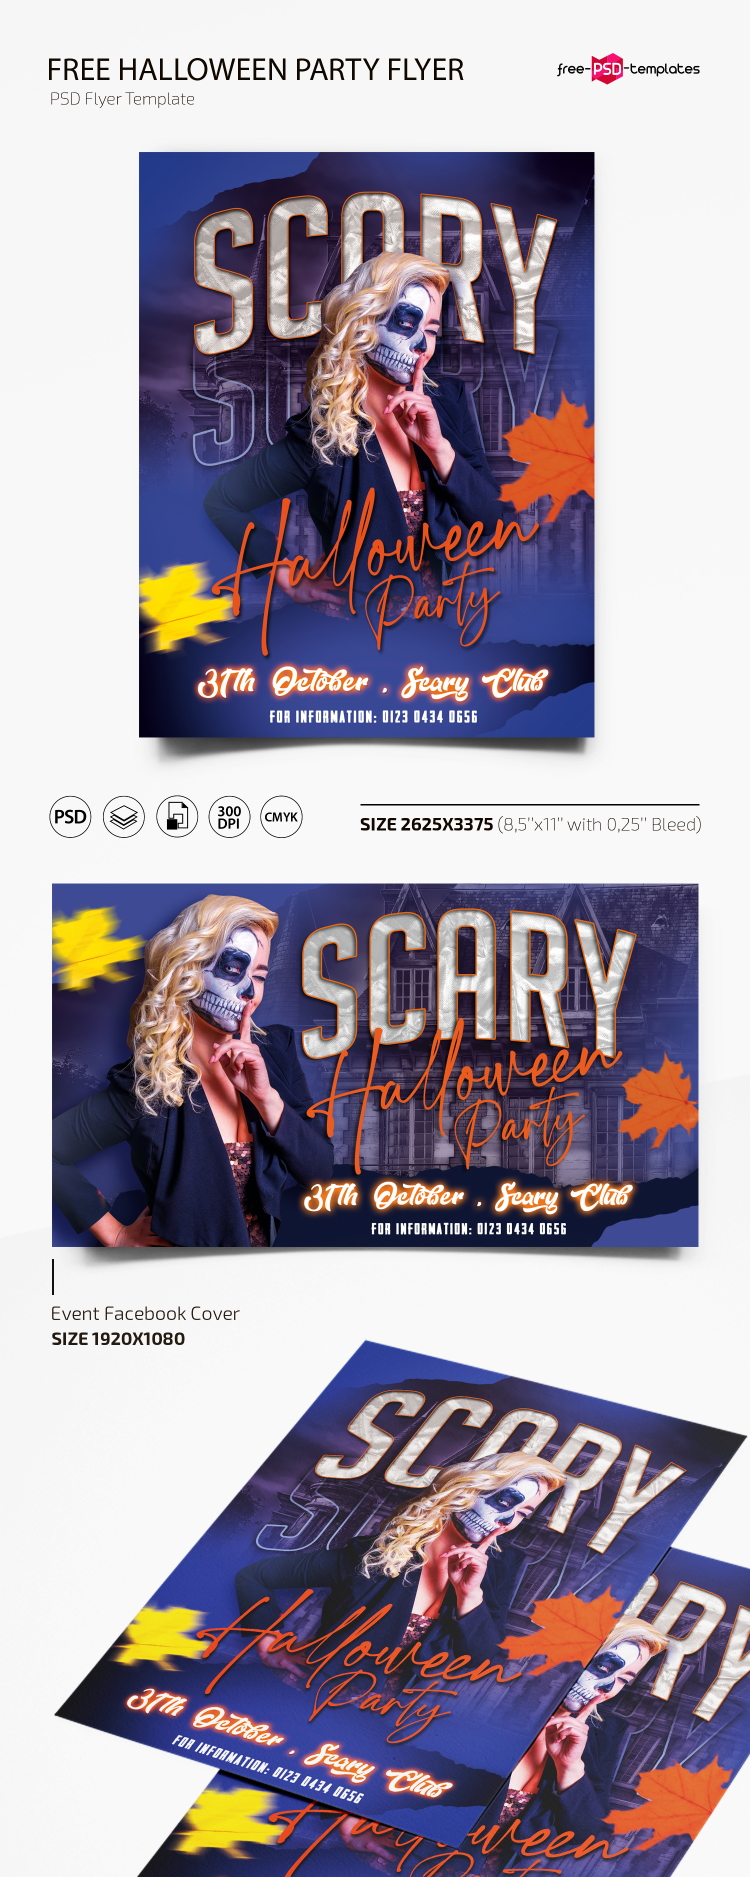 Free Halloween Party Flyer PSD Template